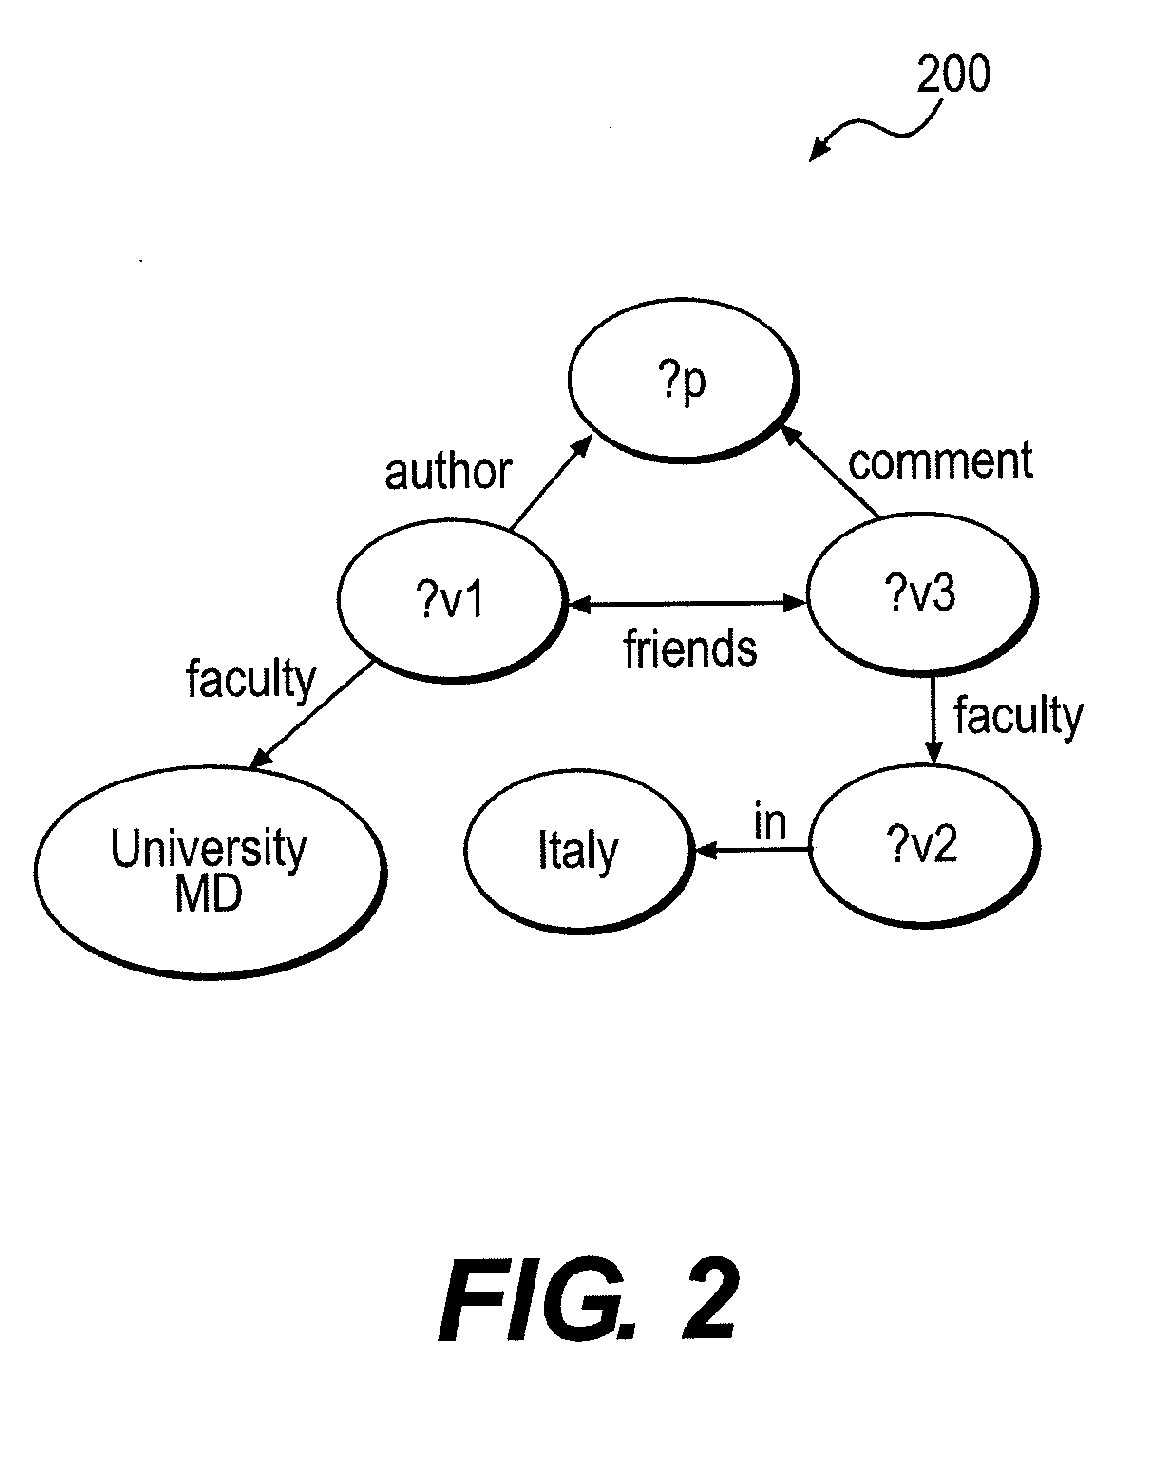 Systmen and method for data management in large data networks